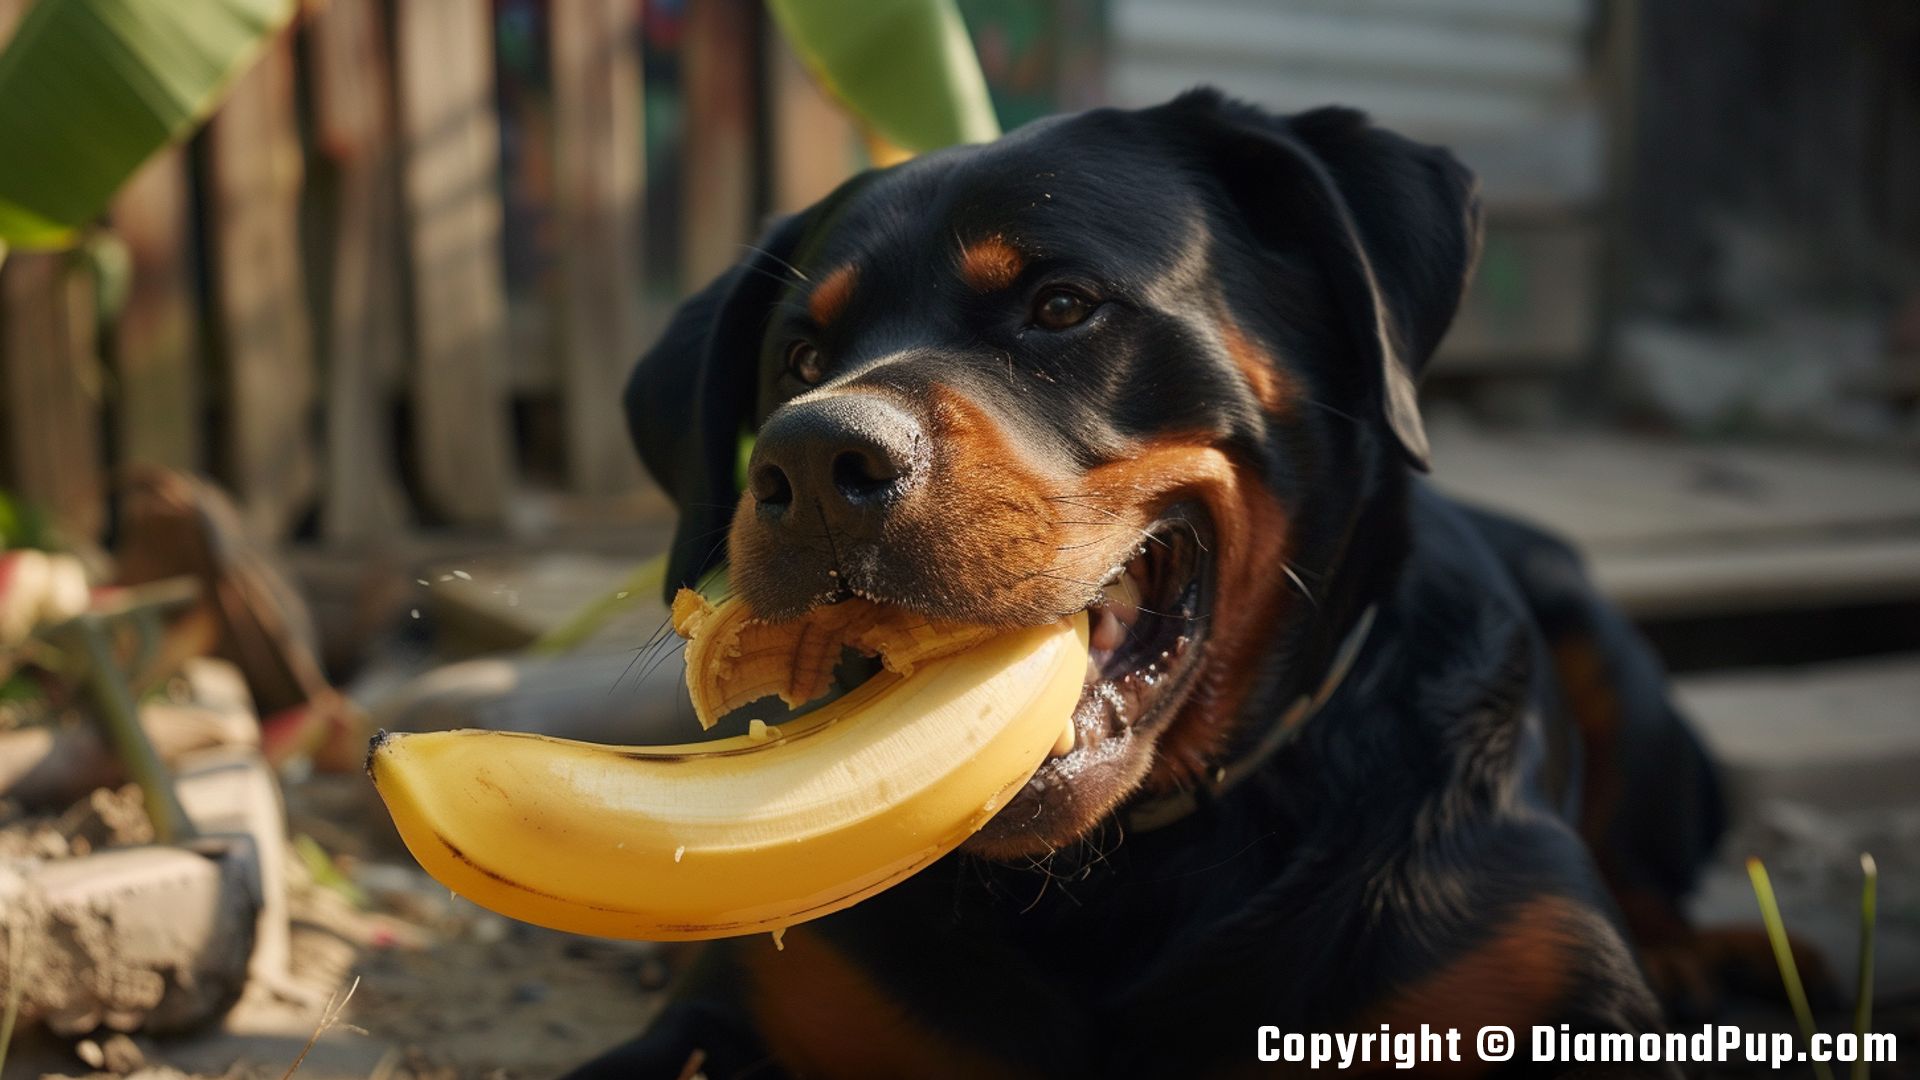 Photograph of Rottweiler Snacking on Banana